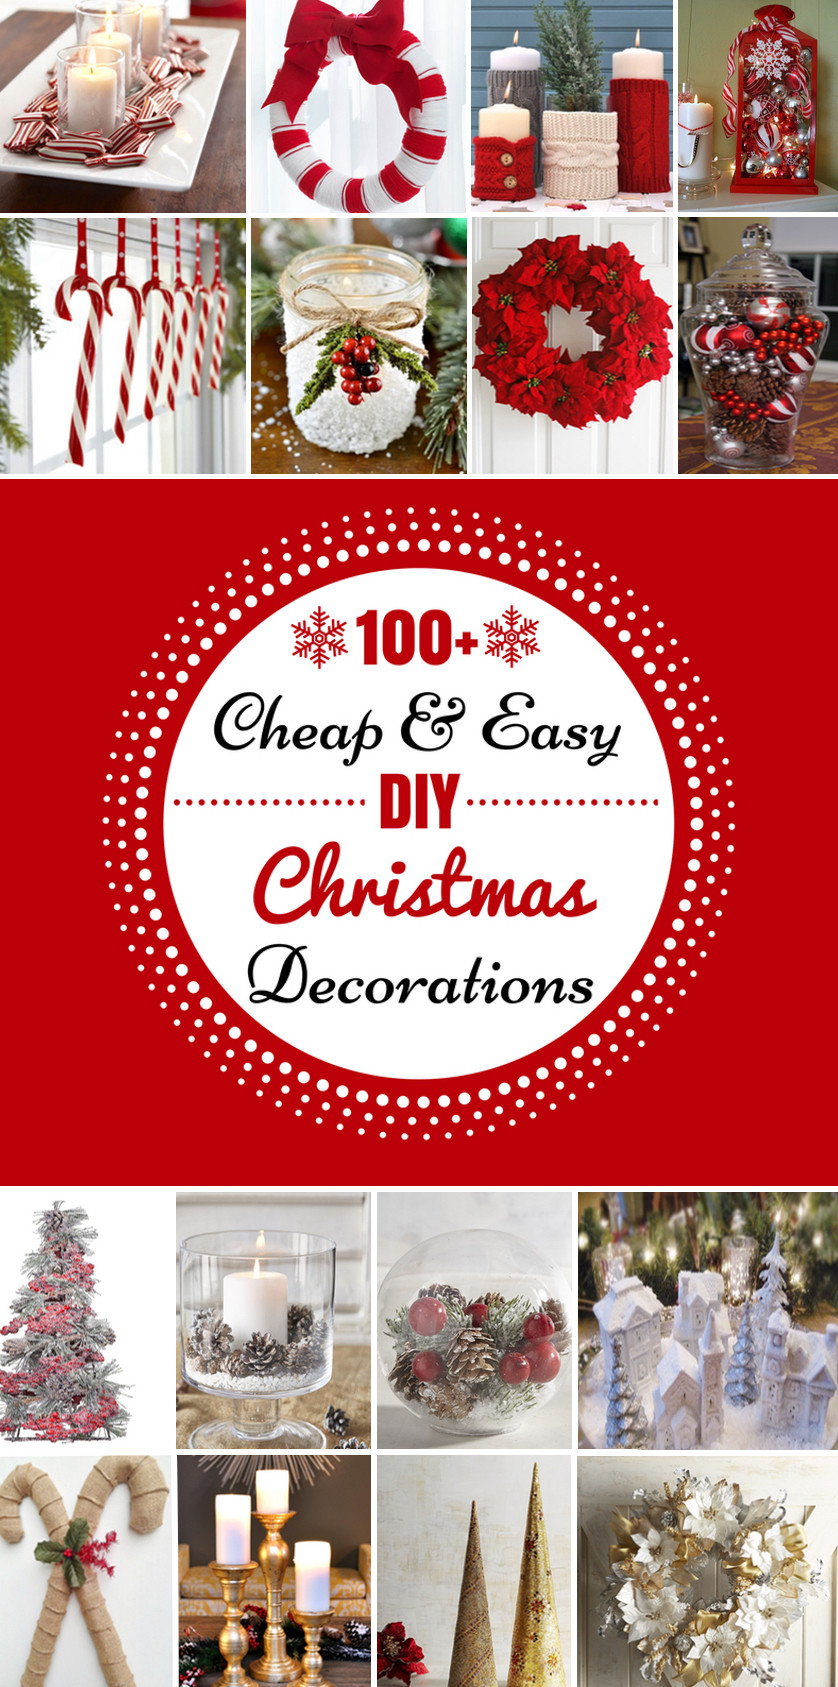 DIY Christmas Decoration
 100 Cheap & Easy DIY Christmas Decorations Prudent Penny